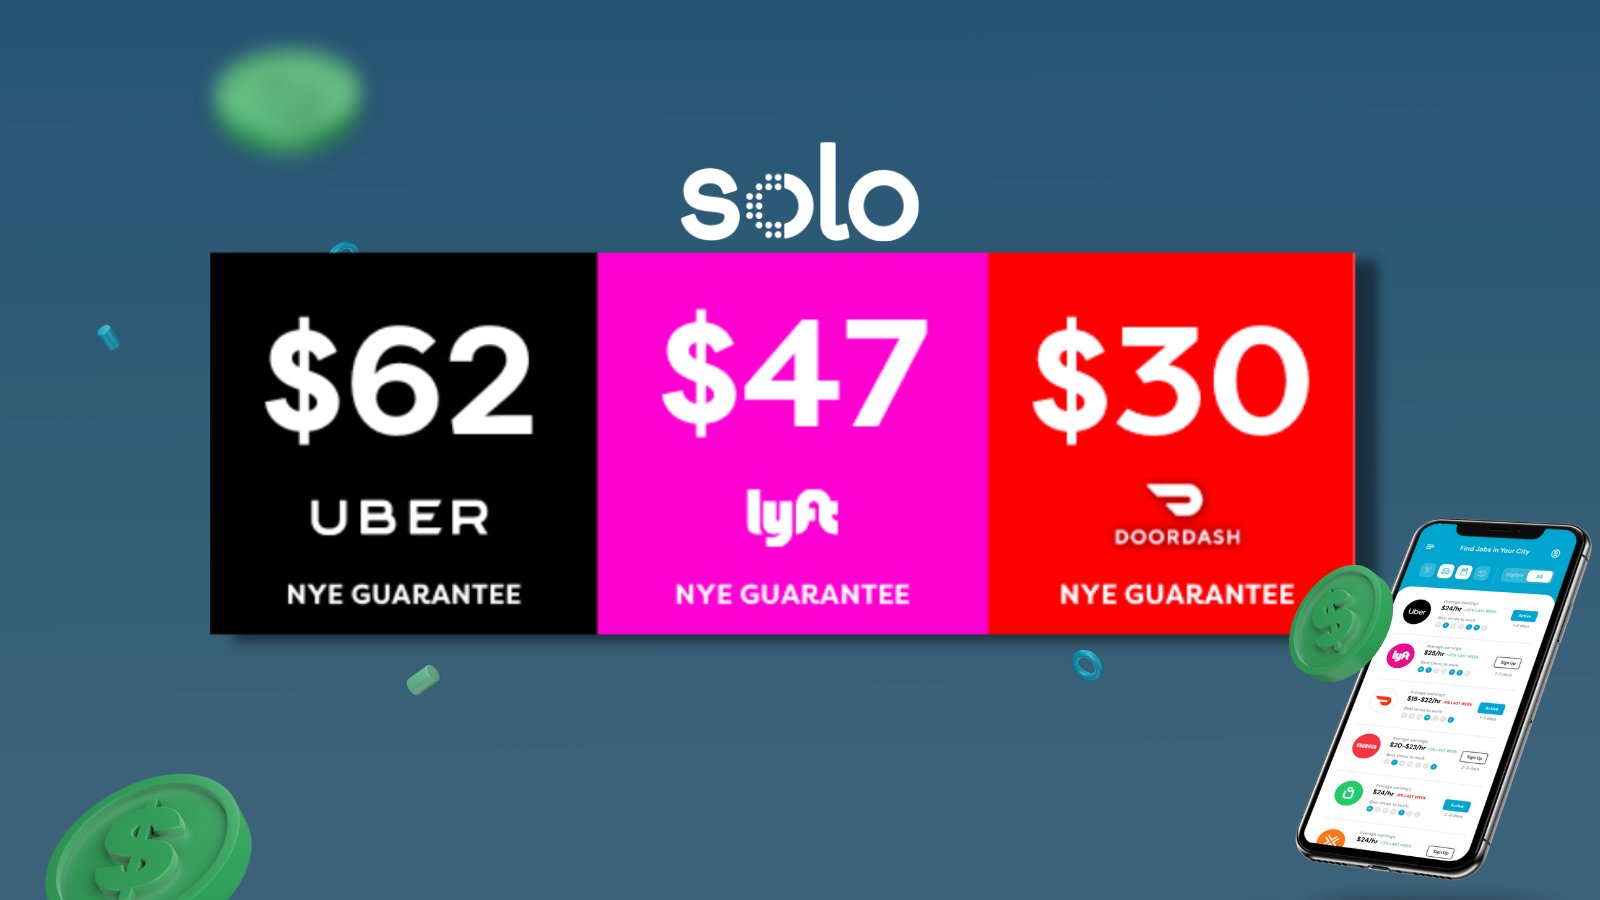 Solo on Twitter: "Make the most of your time this #NYE with Solo!🎊 Schedule your hours in the app to take advantage of highest pay guarantees in Solo history.🤑 Stay safe